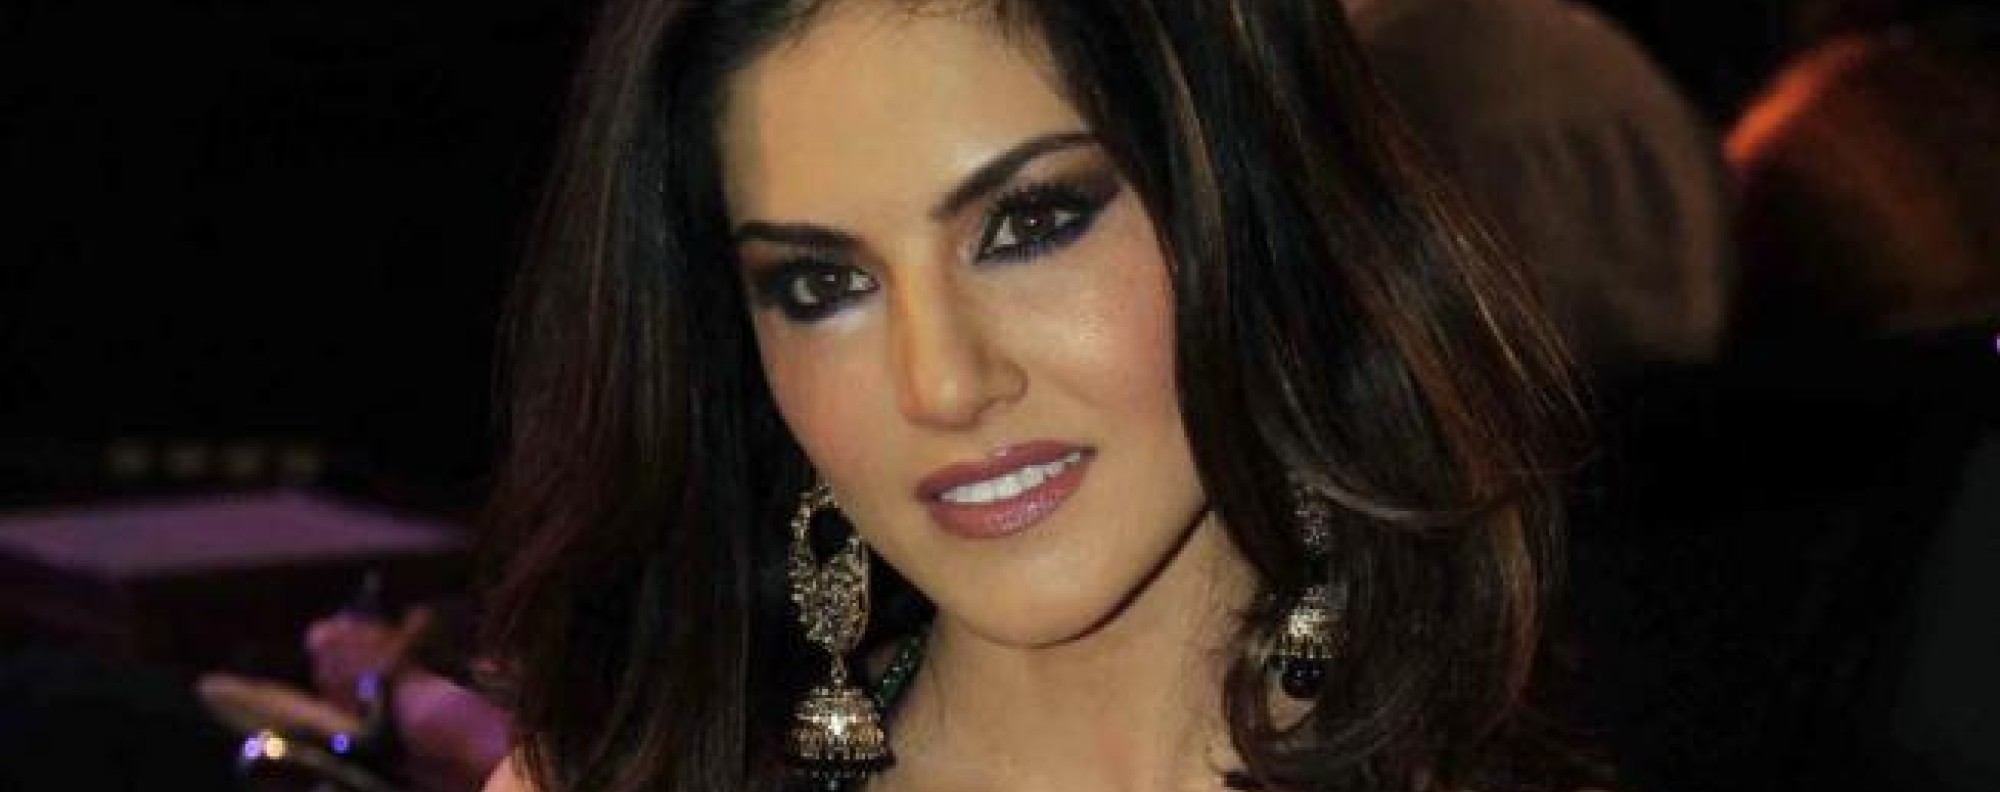 Sani Sex Vid - Rape crisis in India leads to calls for porn star Sunny Leone to be jailed  | South China Morning Post